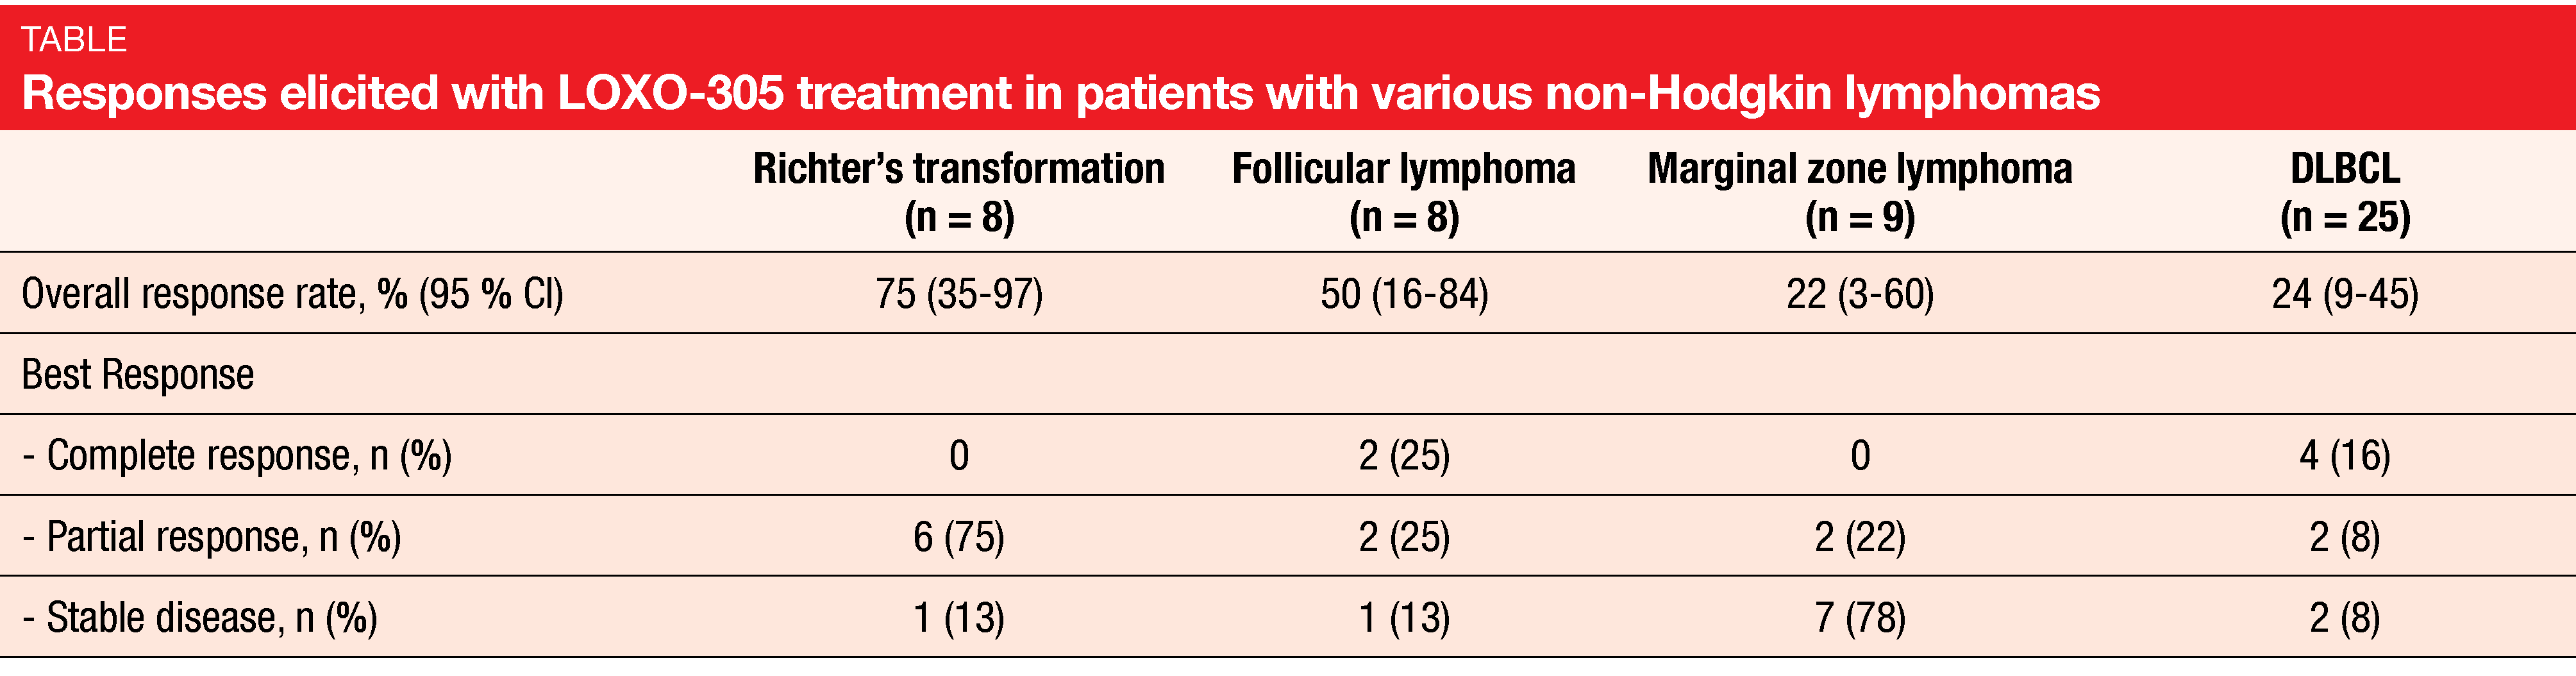 Table Responses elicited with LOXO-305 treatment in patients with various non-Hodgkin lymphomas